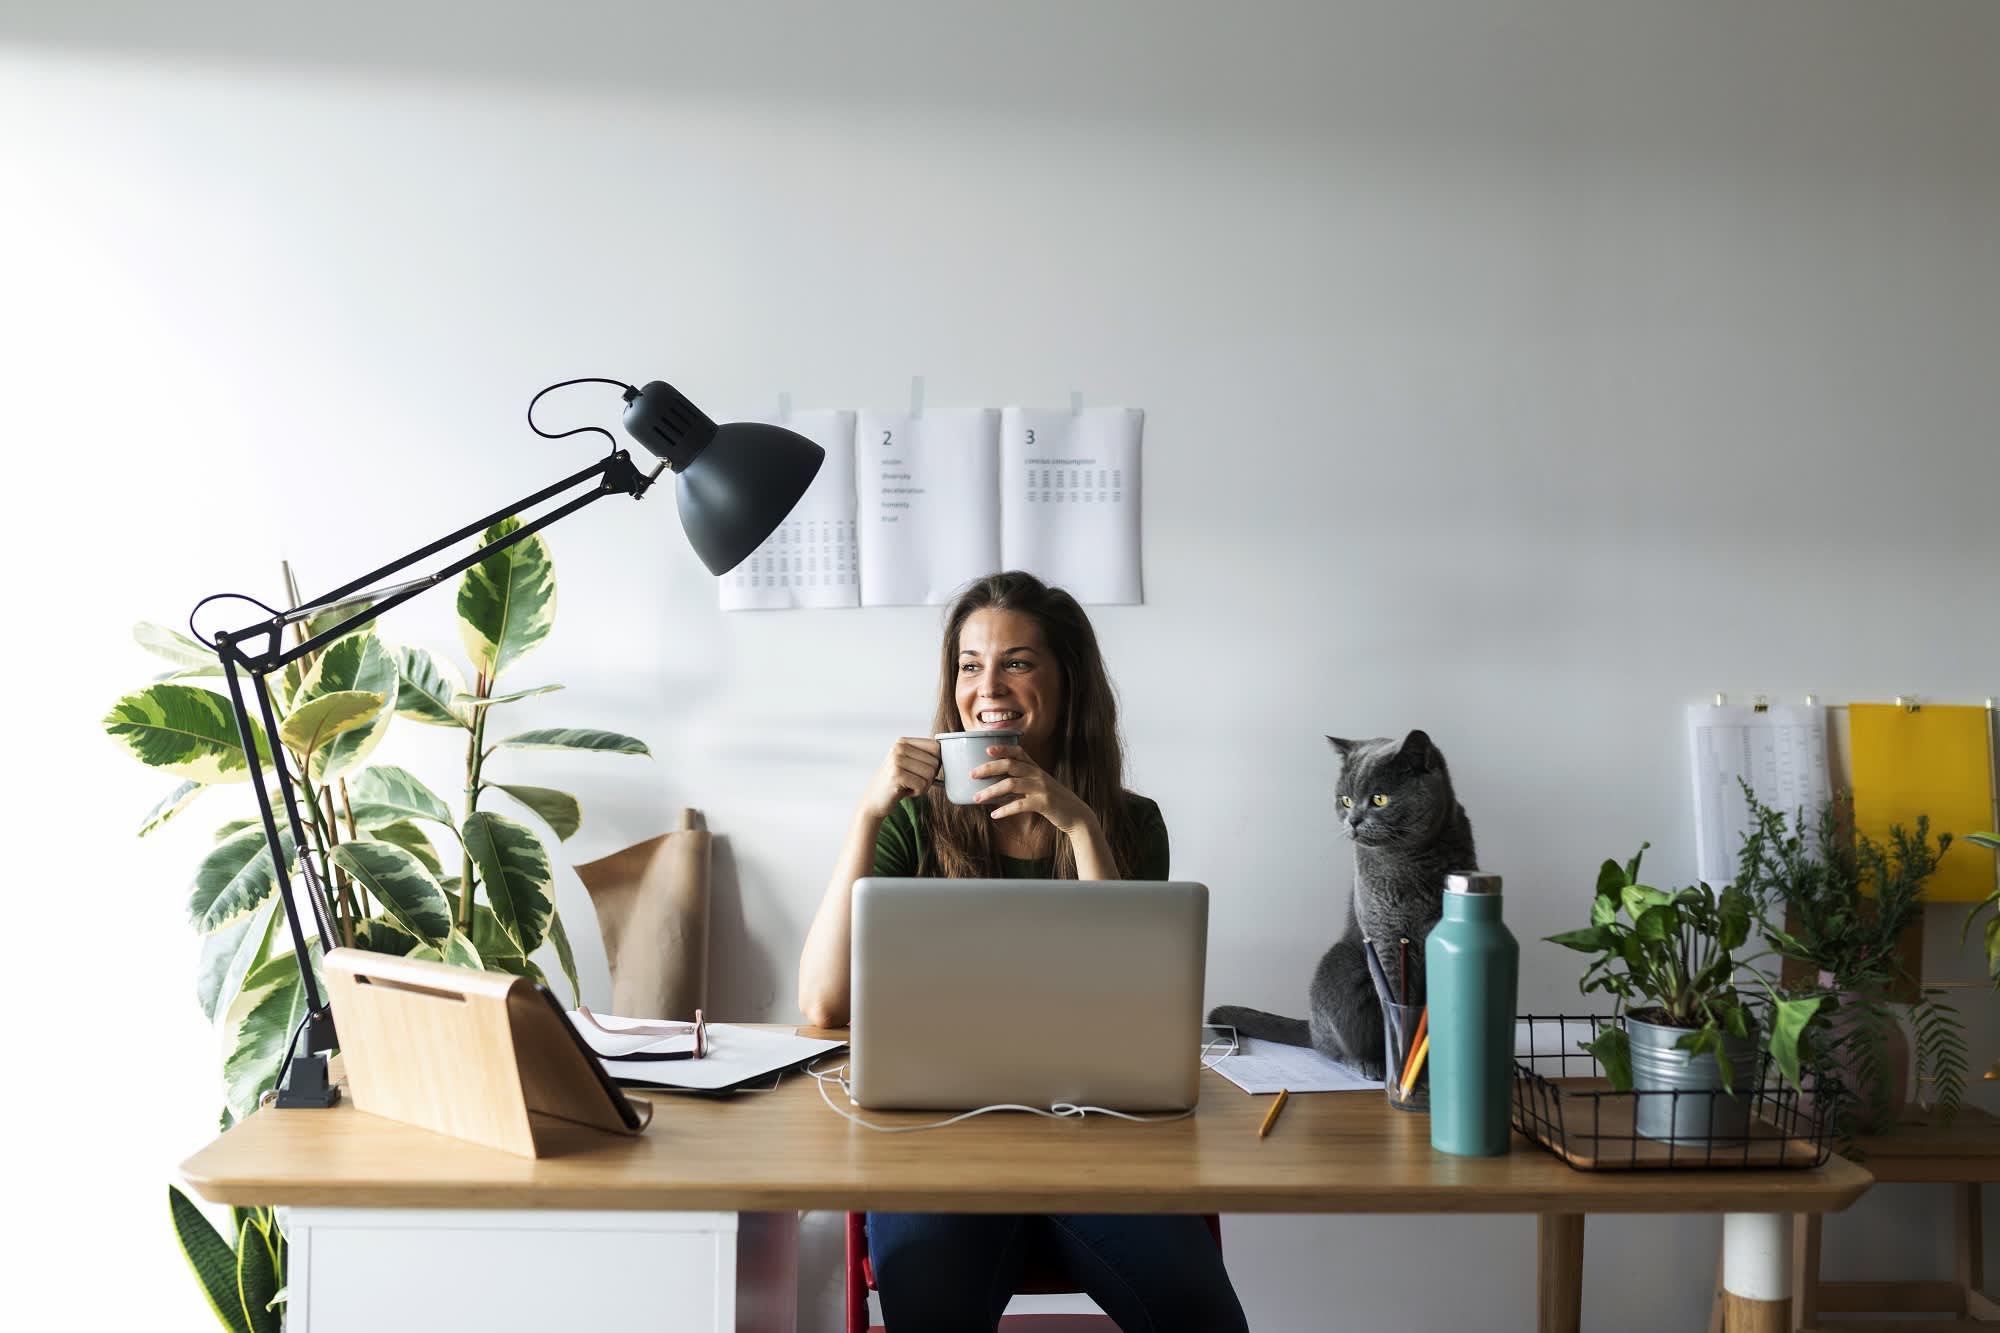 Many companies are requiring employees to be in office a few days a week. Looking to create a balance in your hybrid work schedule? Check out these tips!